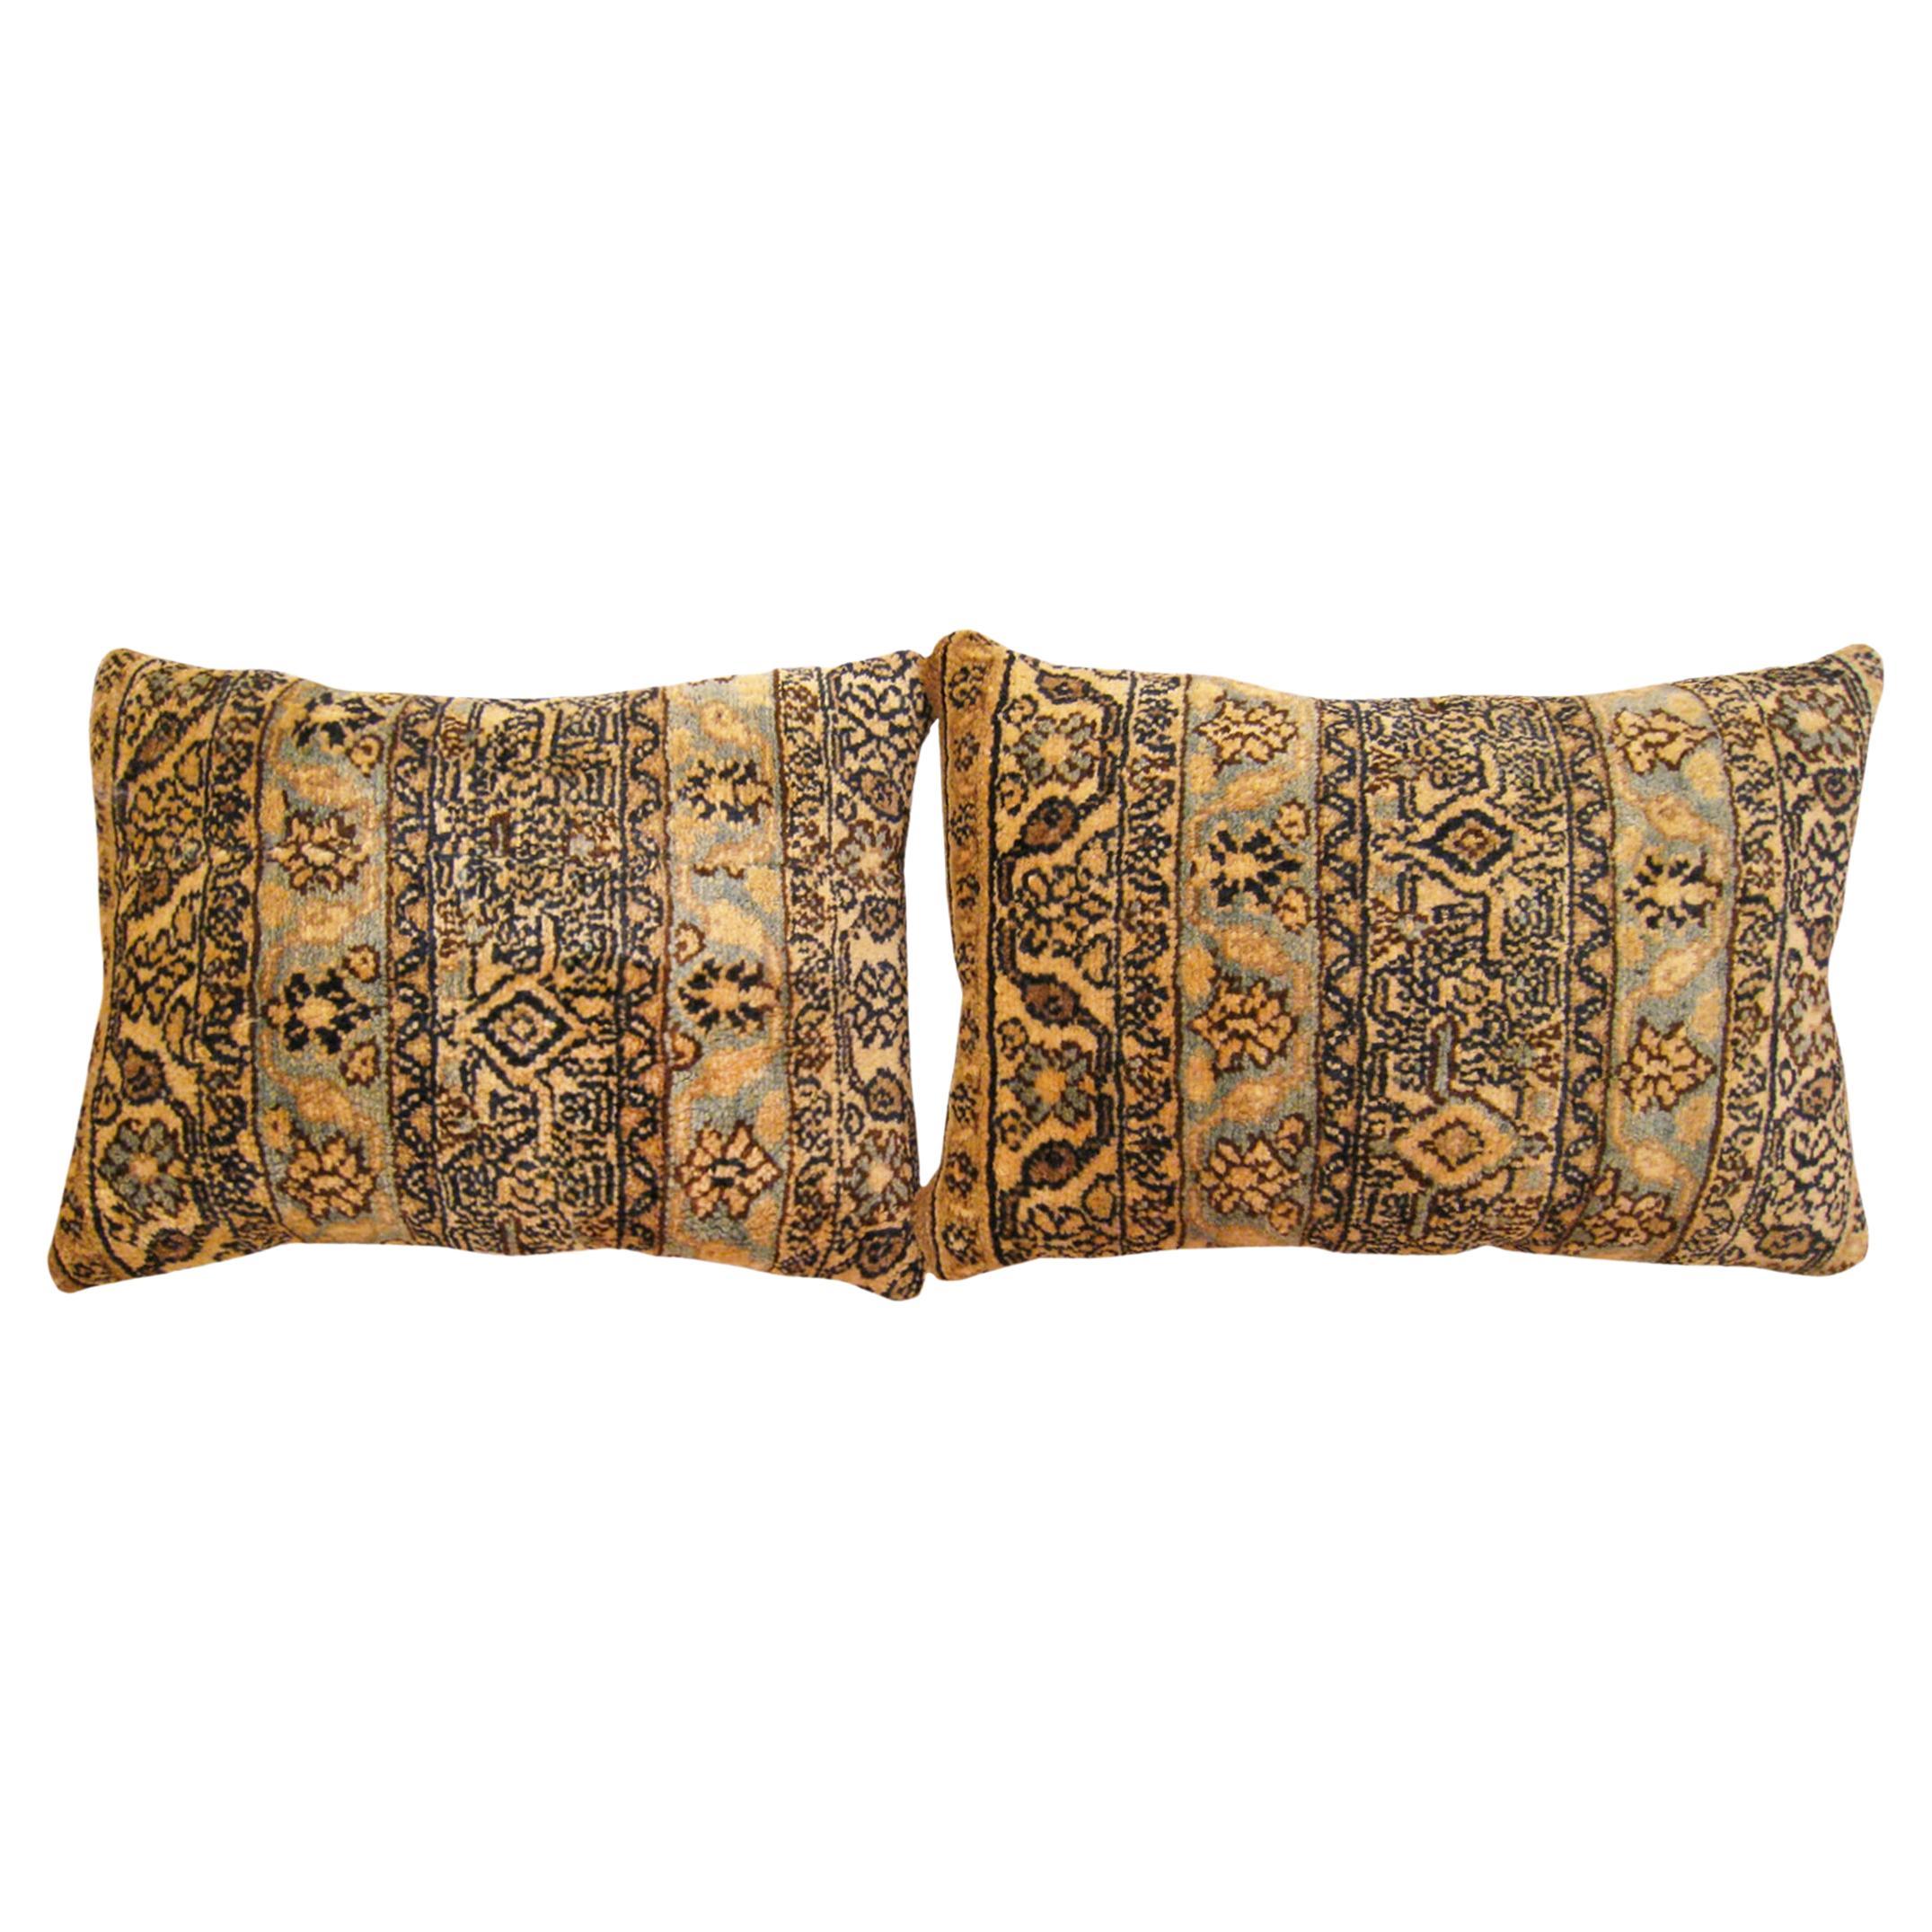 Pair of Decorative Antique Persian Hamadan Rug Pillows with Floral Elements For Sale